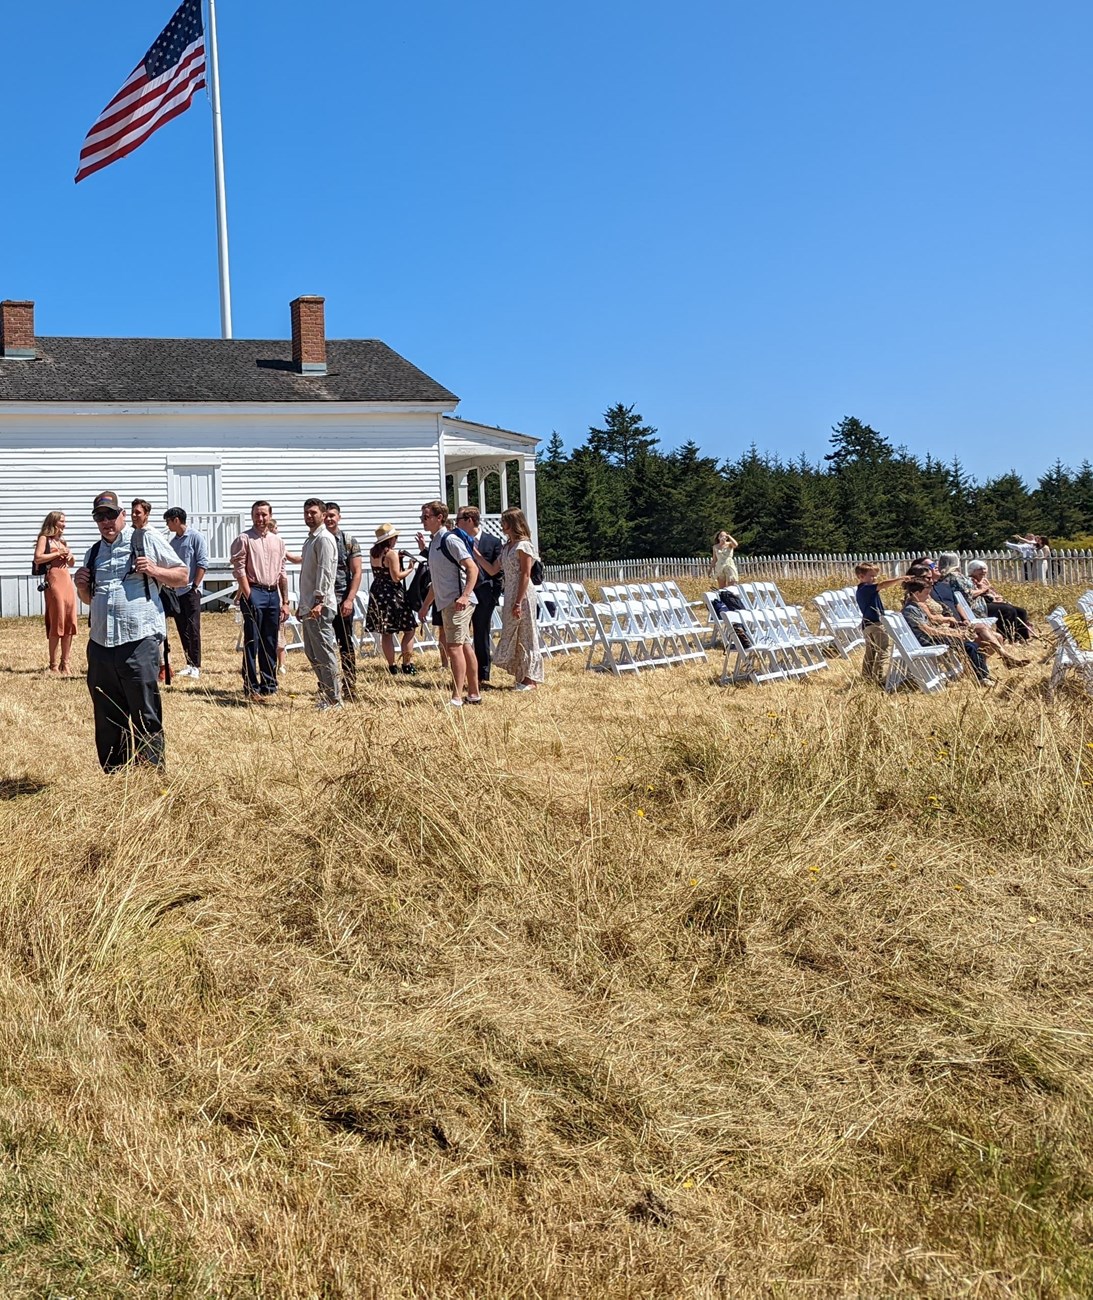 A group of well dressed visitors sitting in white chairs on a prairie in front of a whitewashed historic wood frame building with a giant american flag behind it.